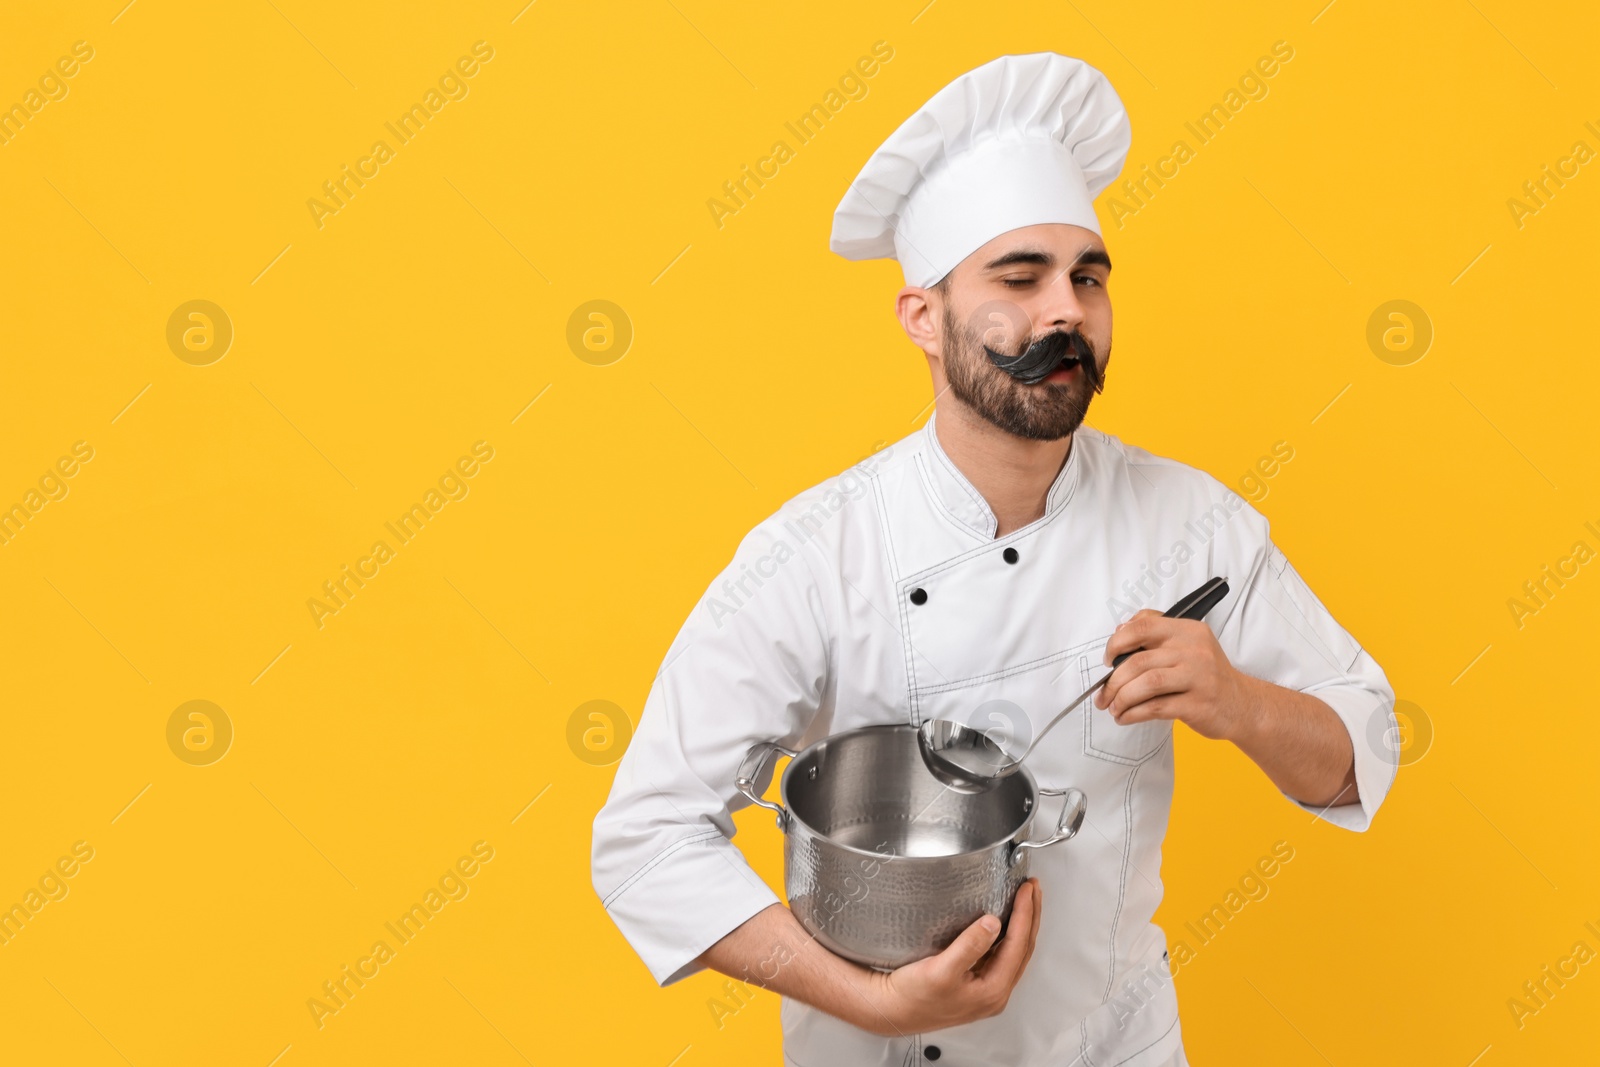 Photo of Professional chef with funny artificial moustache holding cooking pot and ladle on yellow background. Space for text